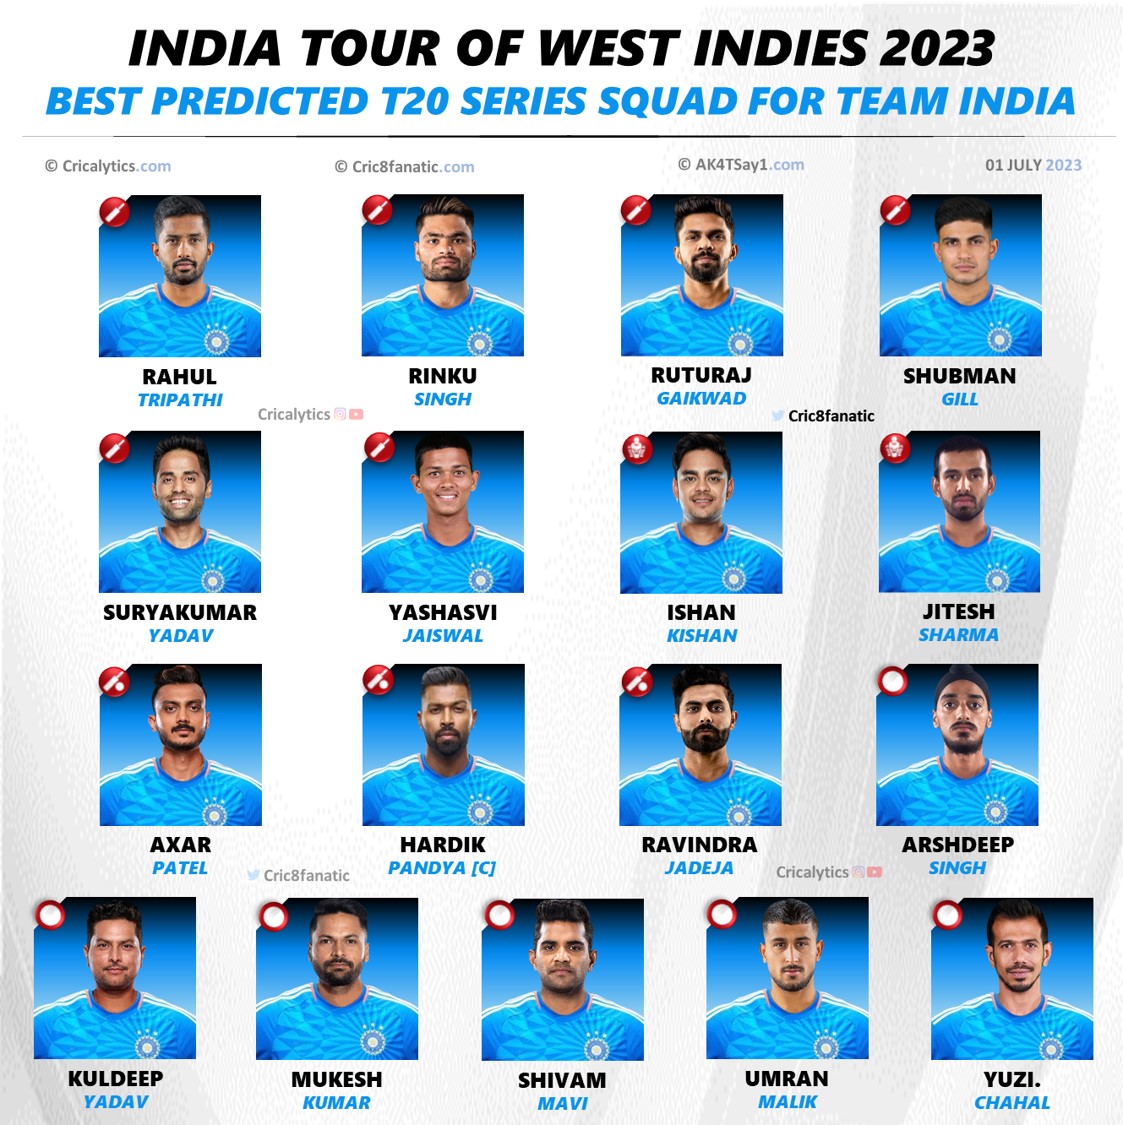 India vs West Indies 2023 Best Predicted T20 Squad Players List